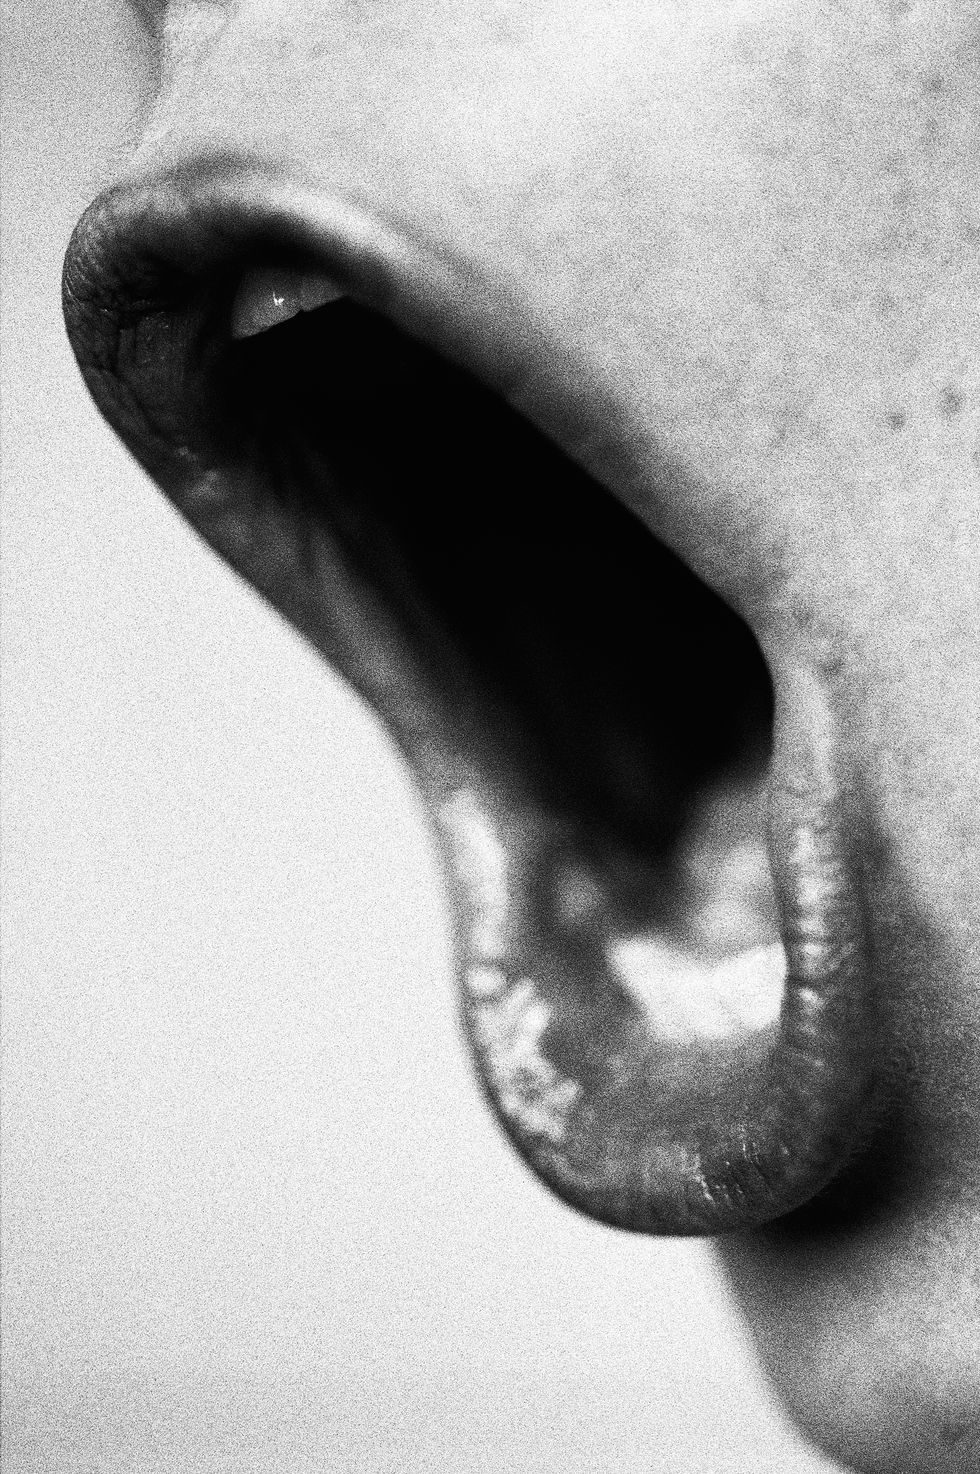 Woman shouting, close-up of mouth